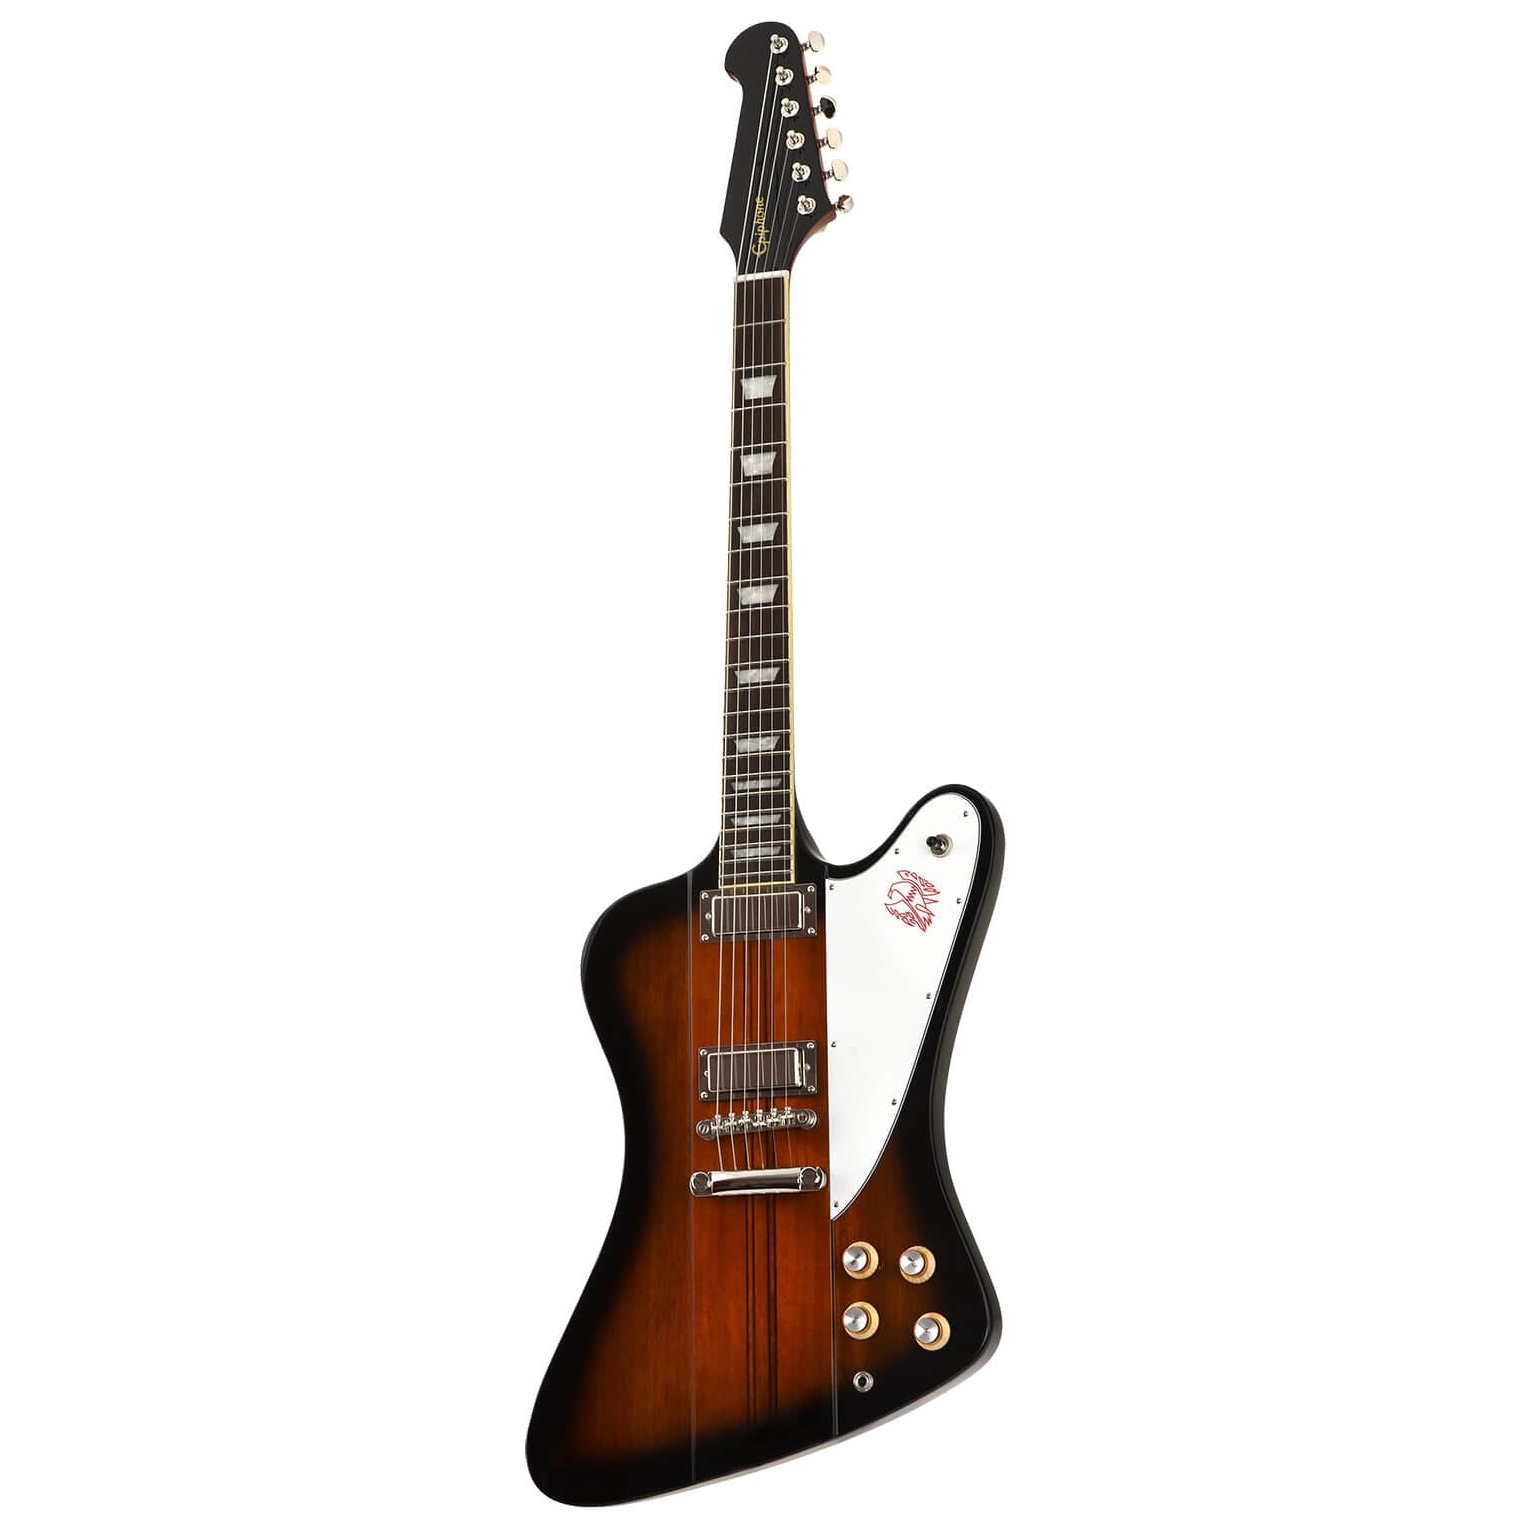 Epiphone Inspired by Gibson Firebird VS